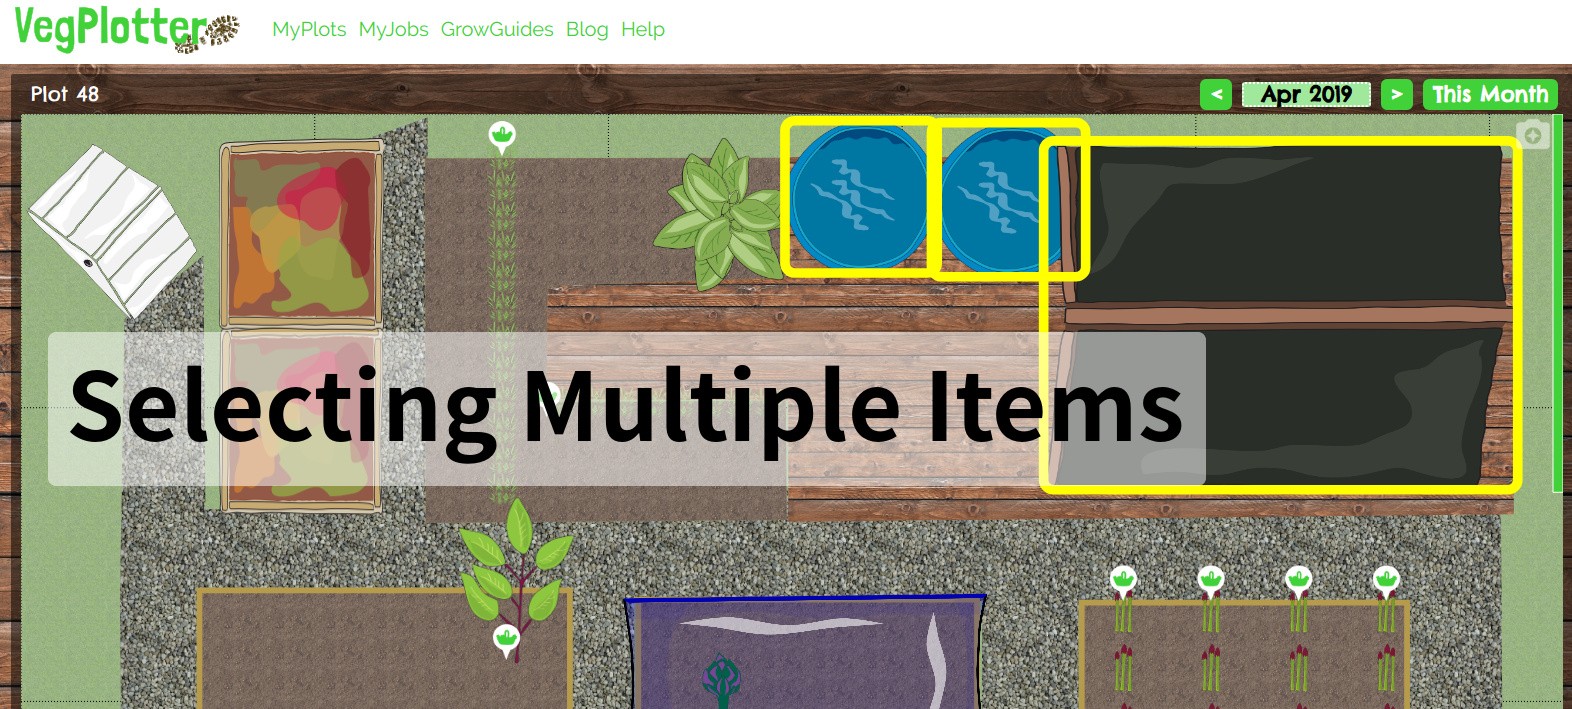 How to select and move items as a group in VegPlotter's free vegetable garden planner